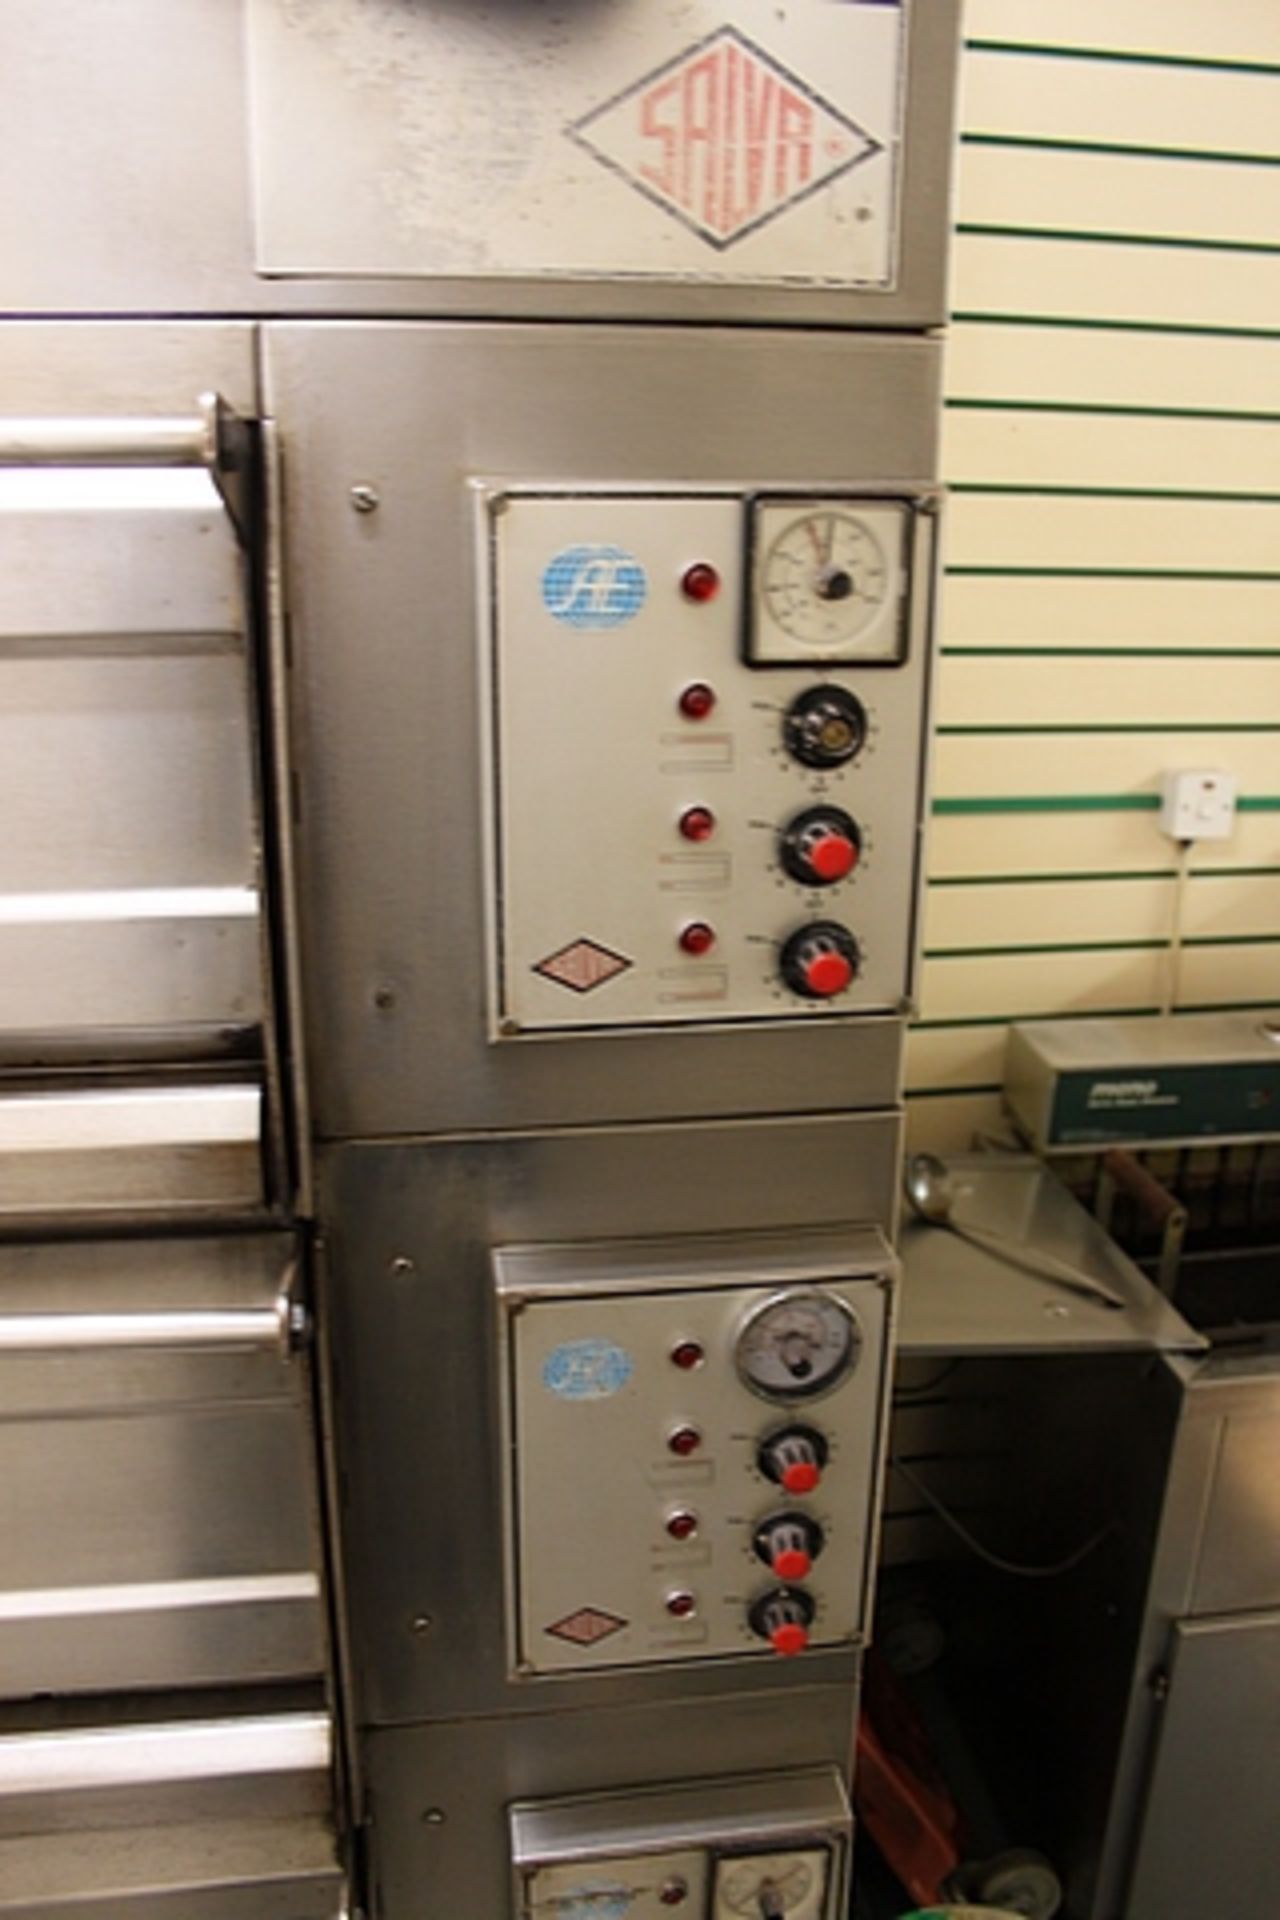 Salva 5 deck bread oven product gap size 1450mm x 250mm overall size 1900mm x 1070mm x 1900mm - Image 5 of 6